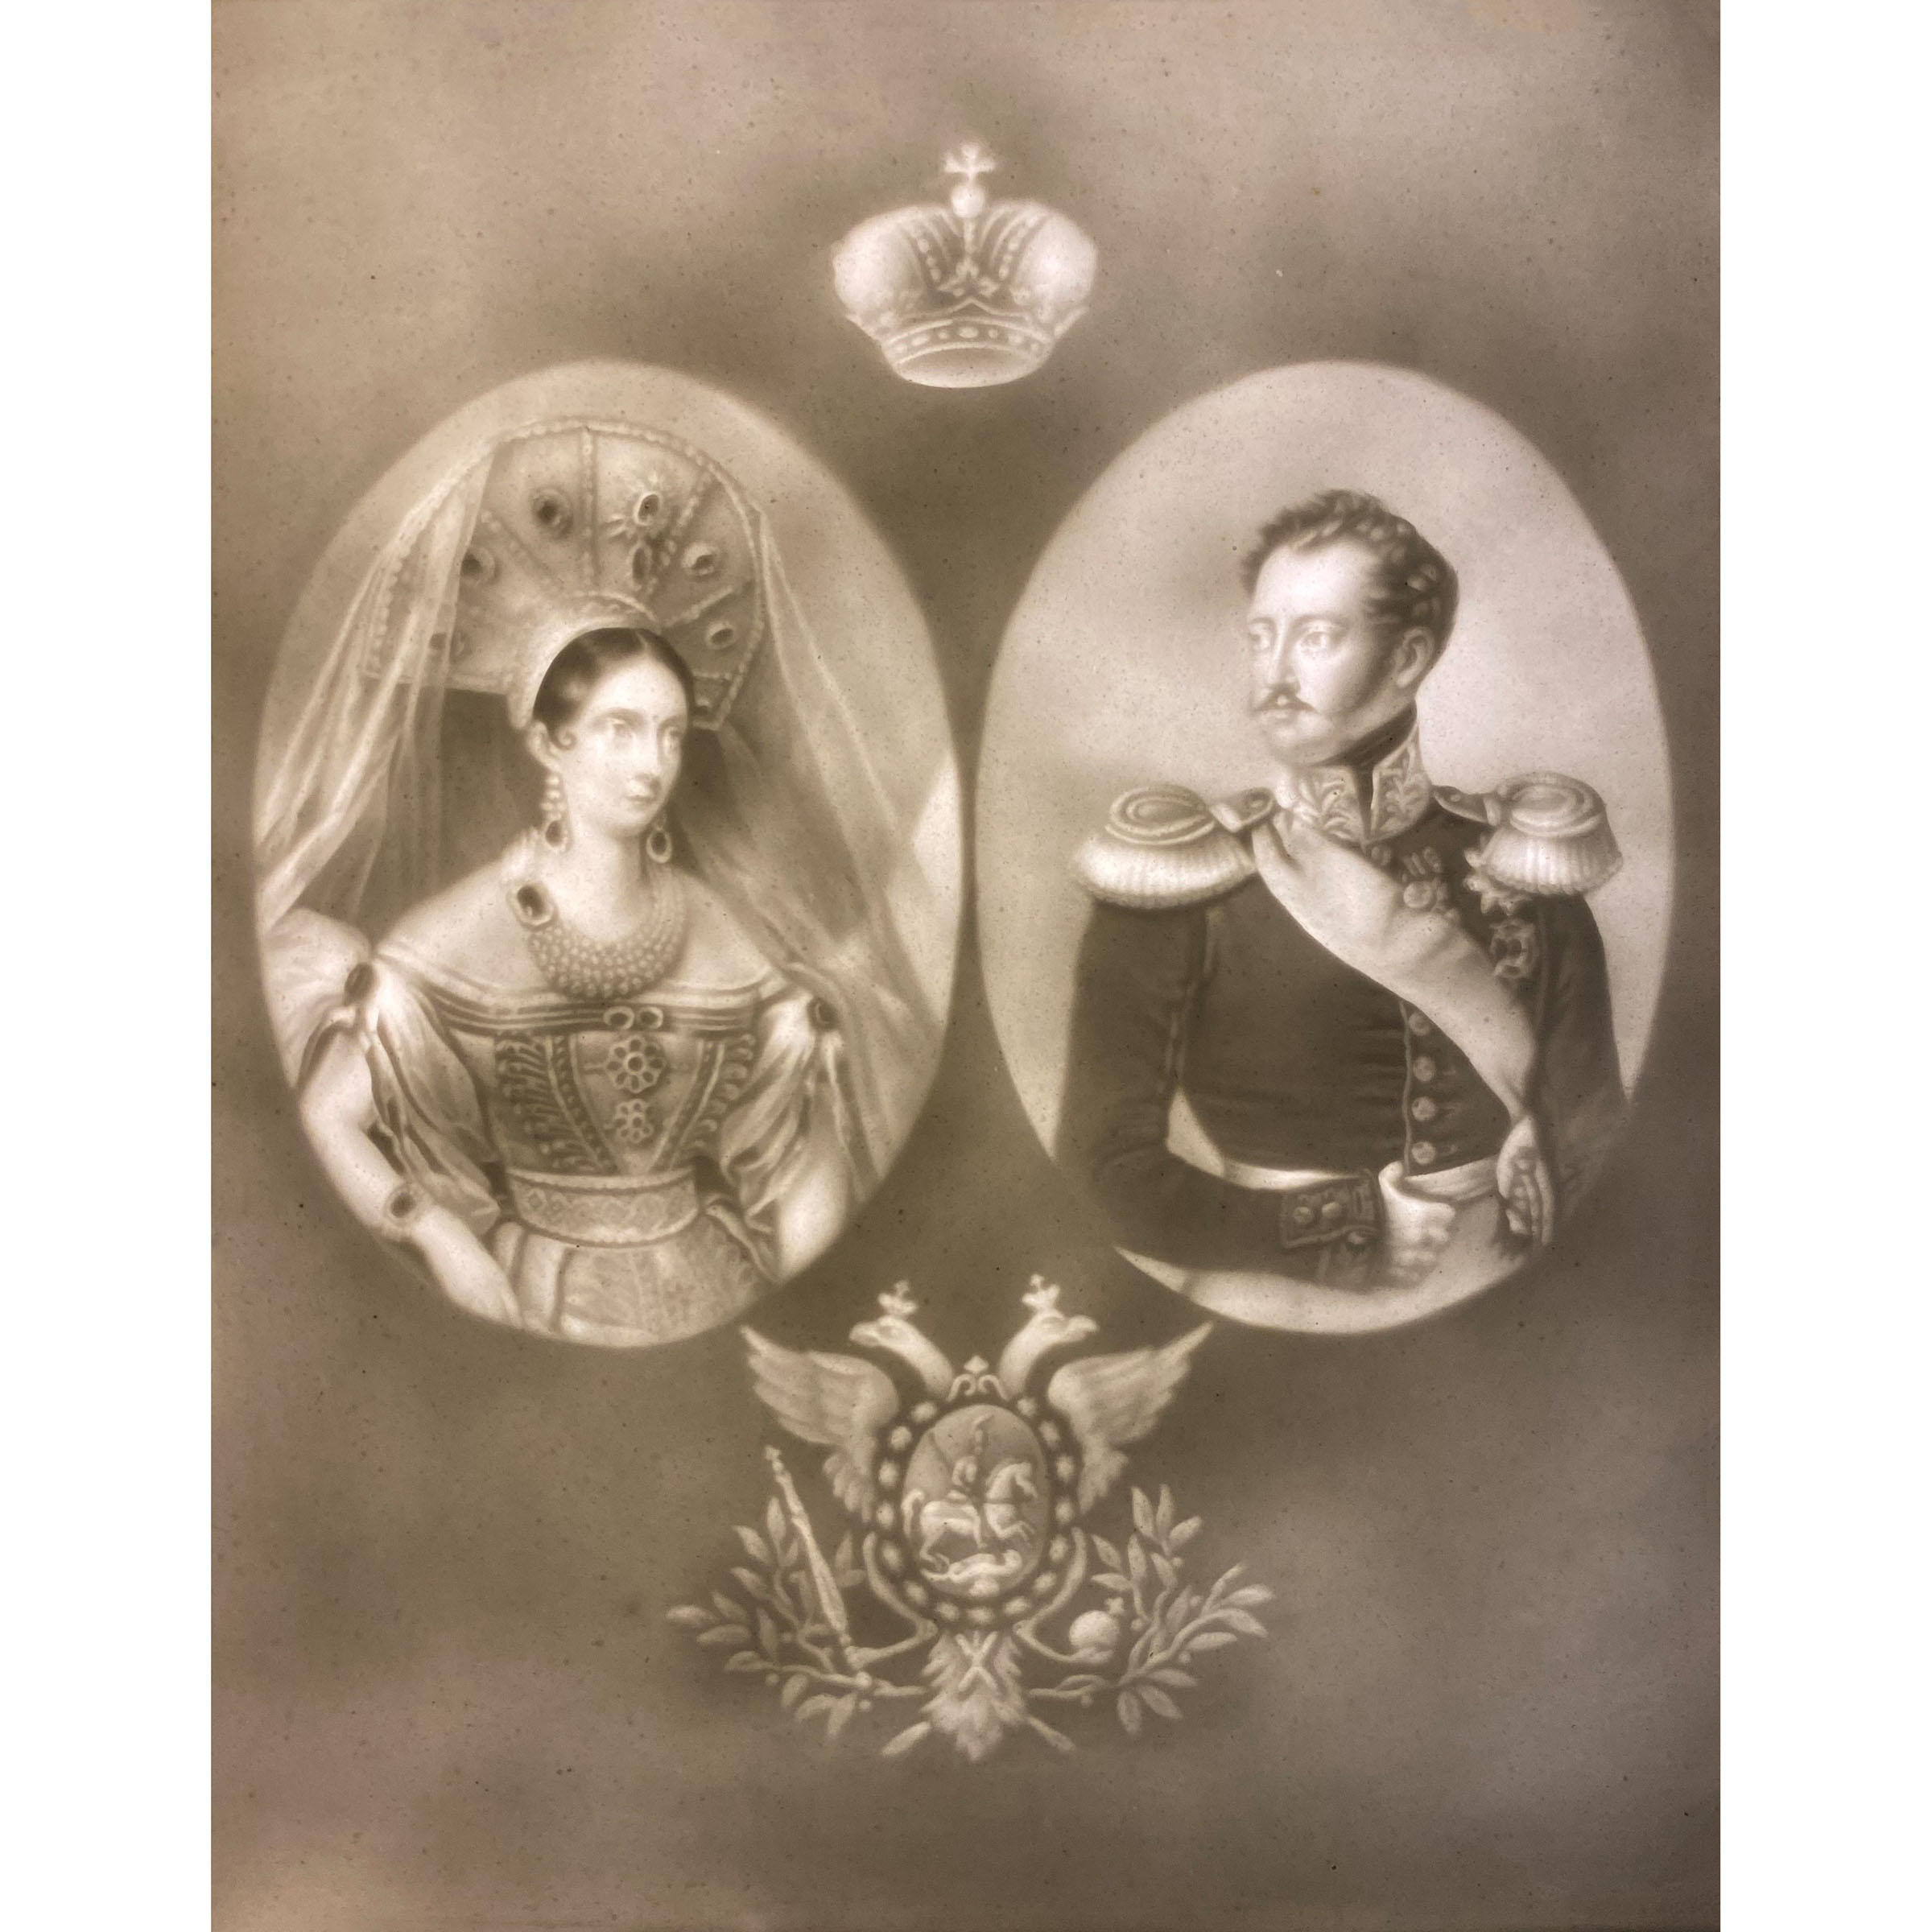 Biscuit Porcelain Lithophane Portrait Panel of Nicholas I, Emperor of Russia, and Alexandra Feodorovna, Imperial Porcelain Factory, St. Petersburg, c.1840